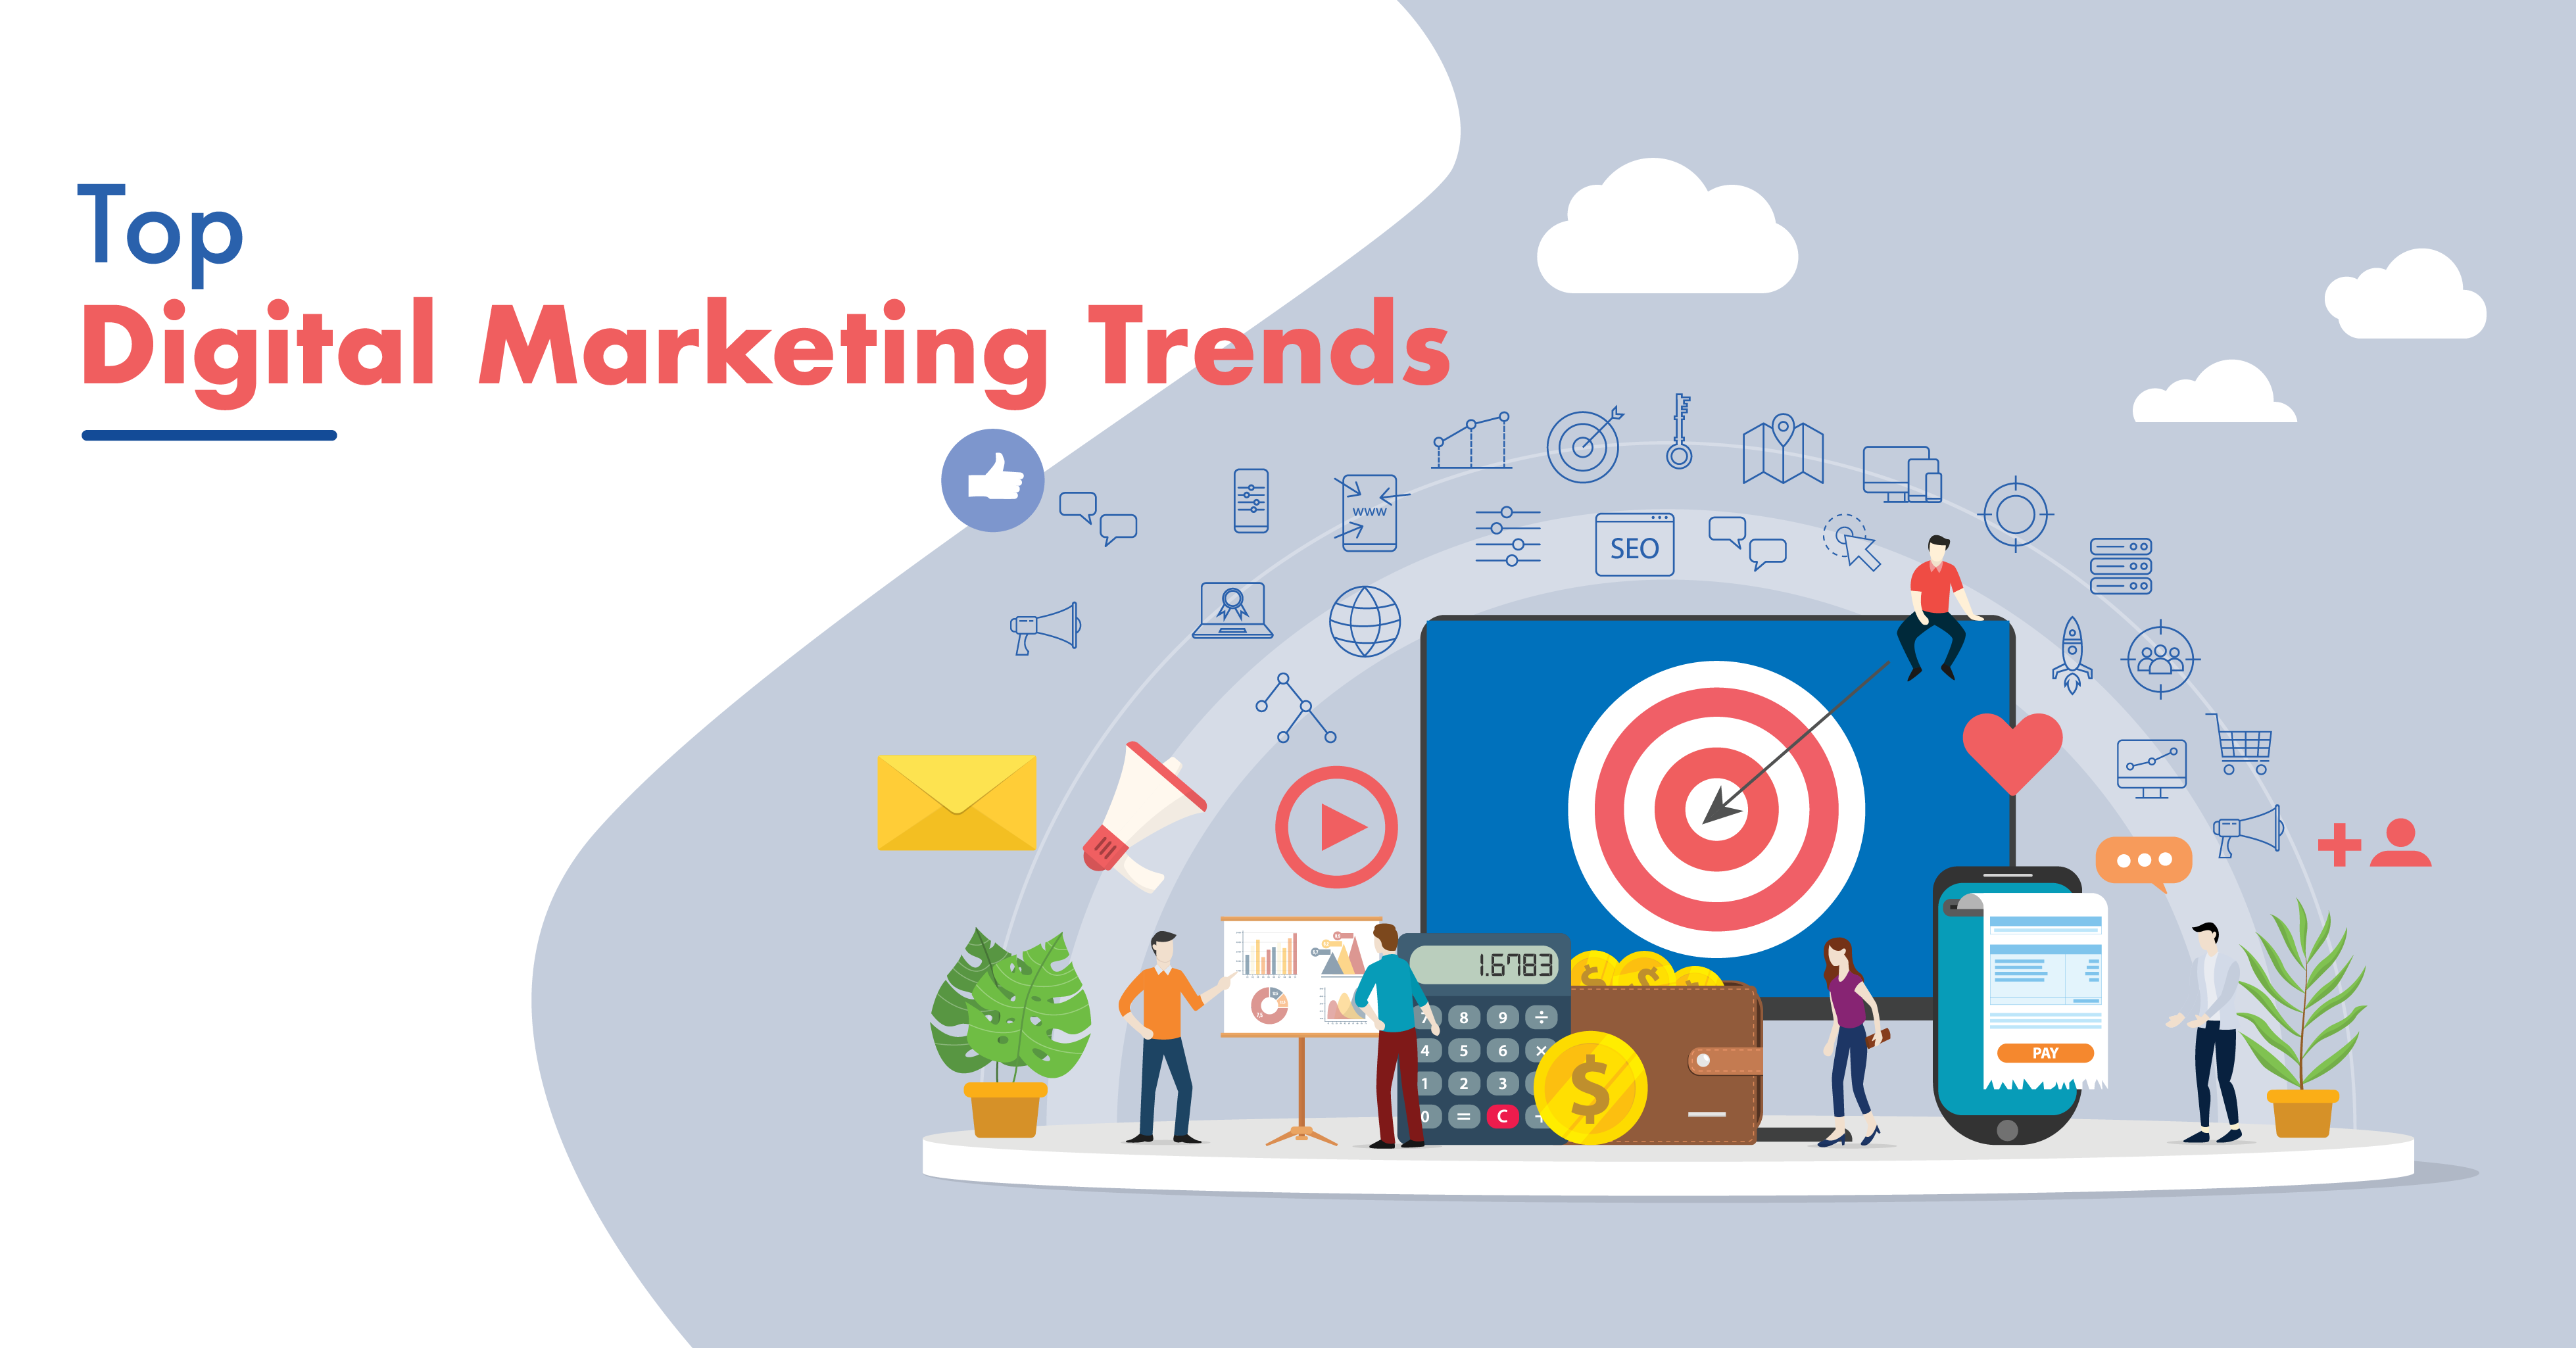 what are the top digital marketing trends